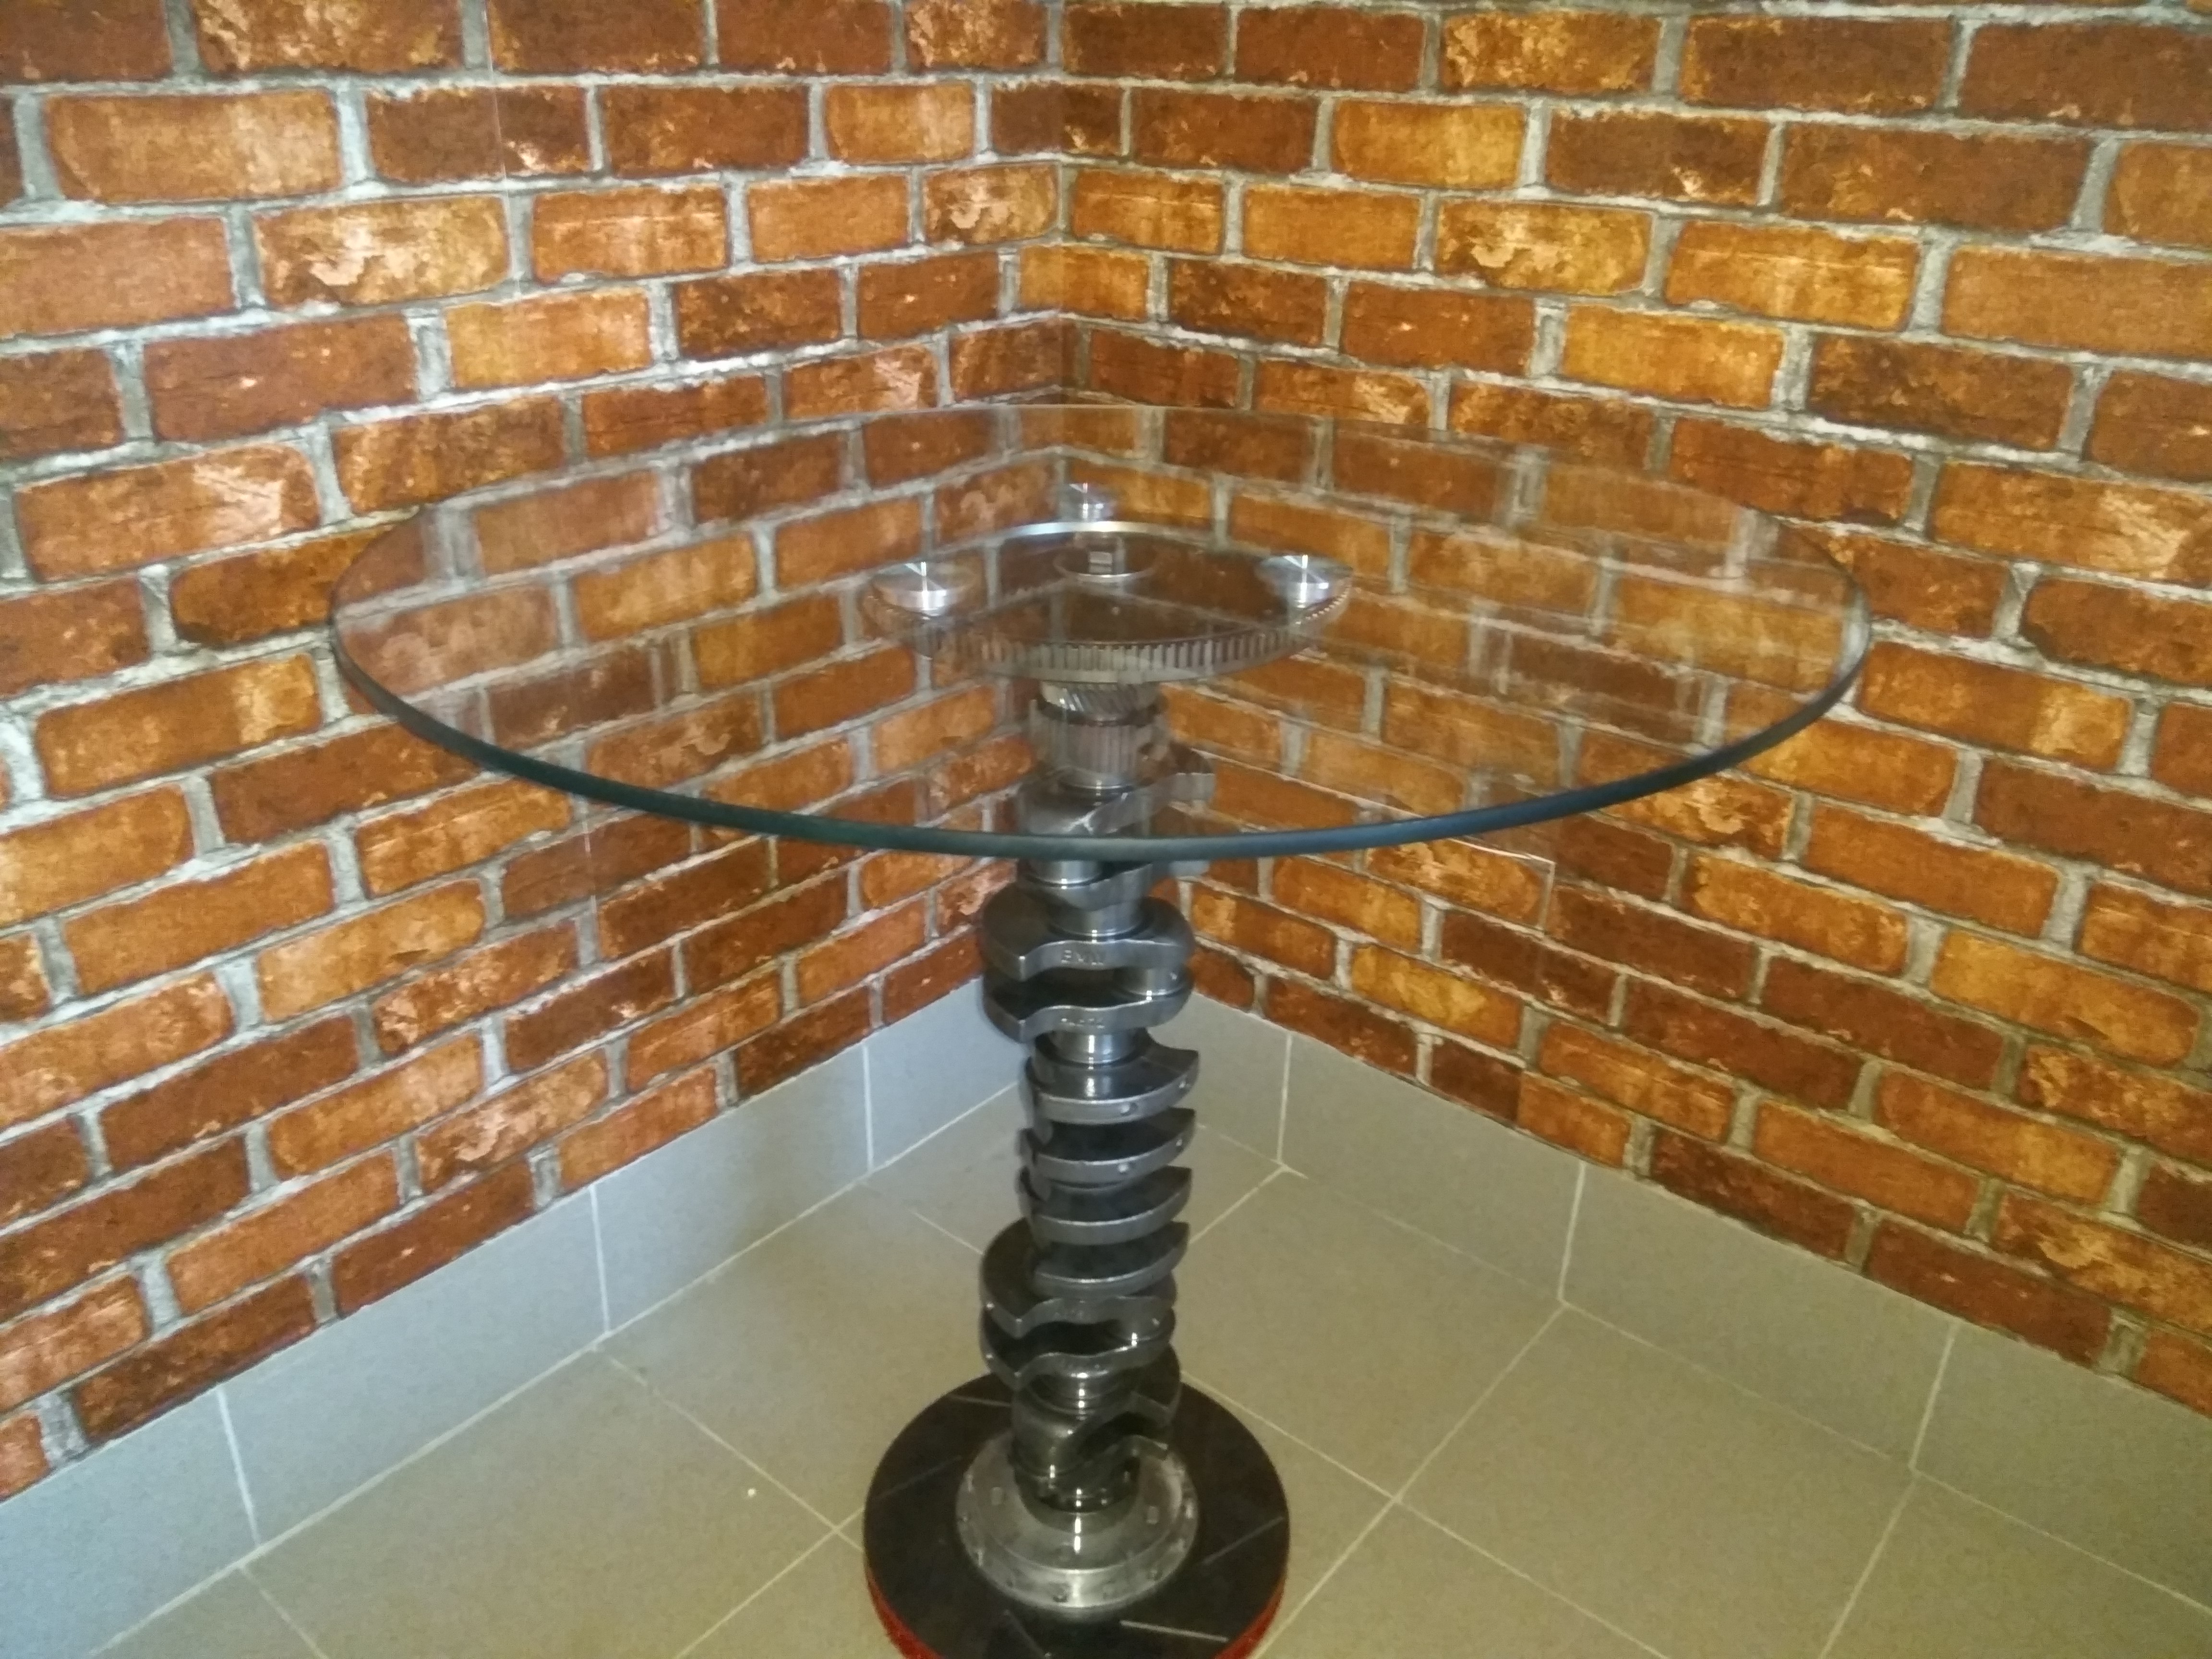 (photo) Two students from Varniţa make tables and lamps from parts of cars and motorcycles